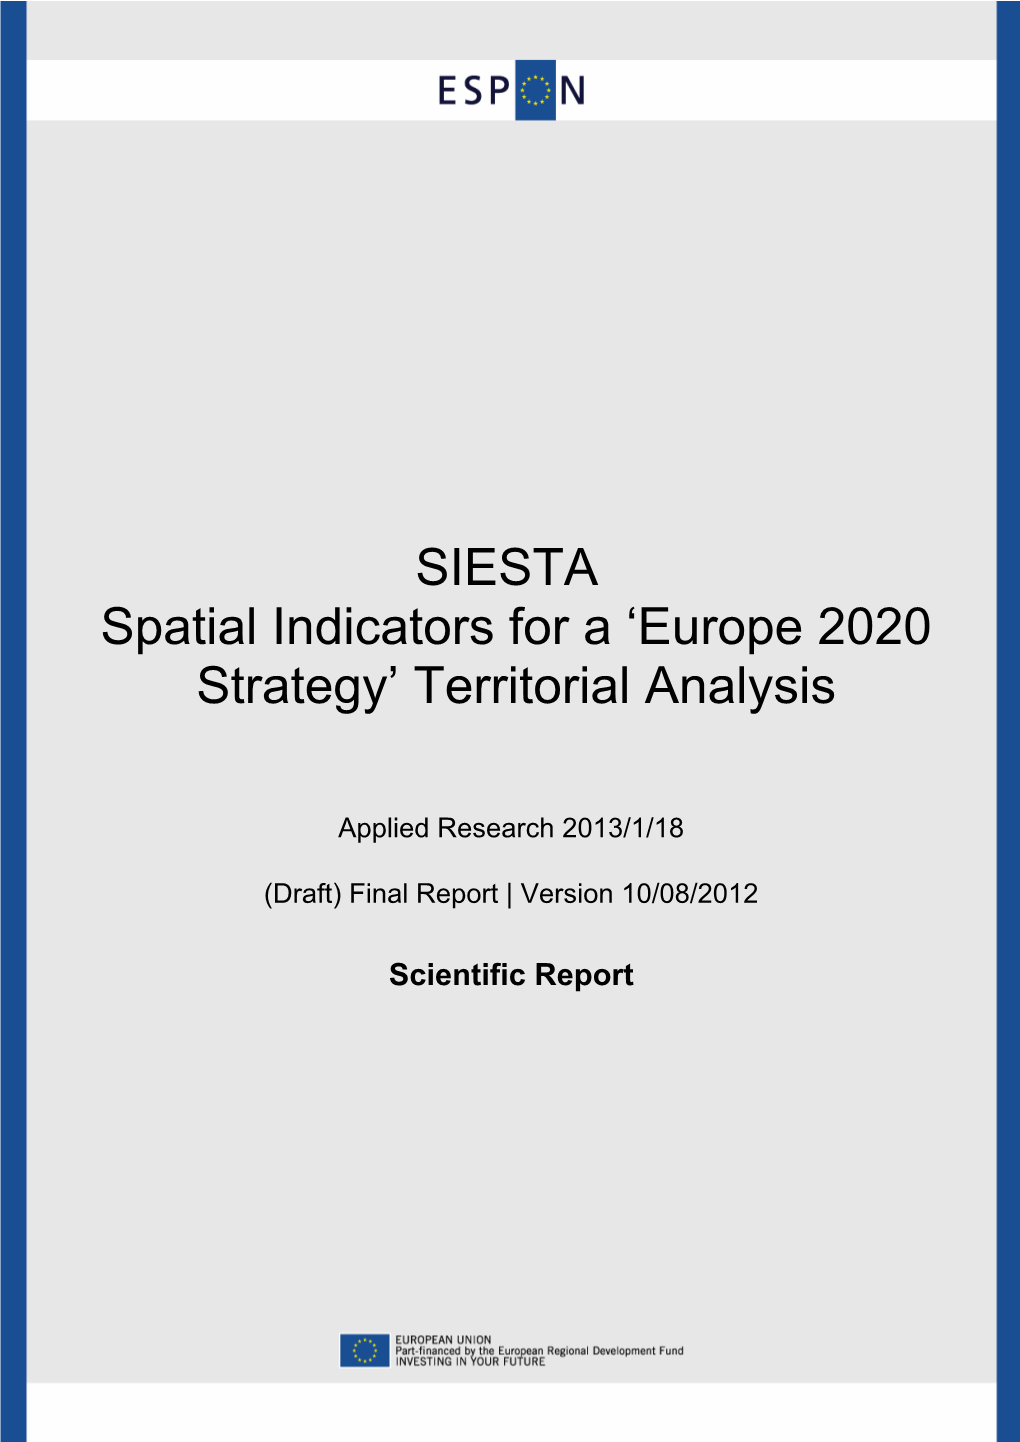 SIESTA Spatial Indicators for a 'Europe 2020 Strategy'